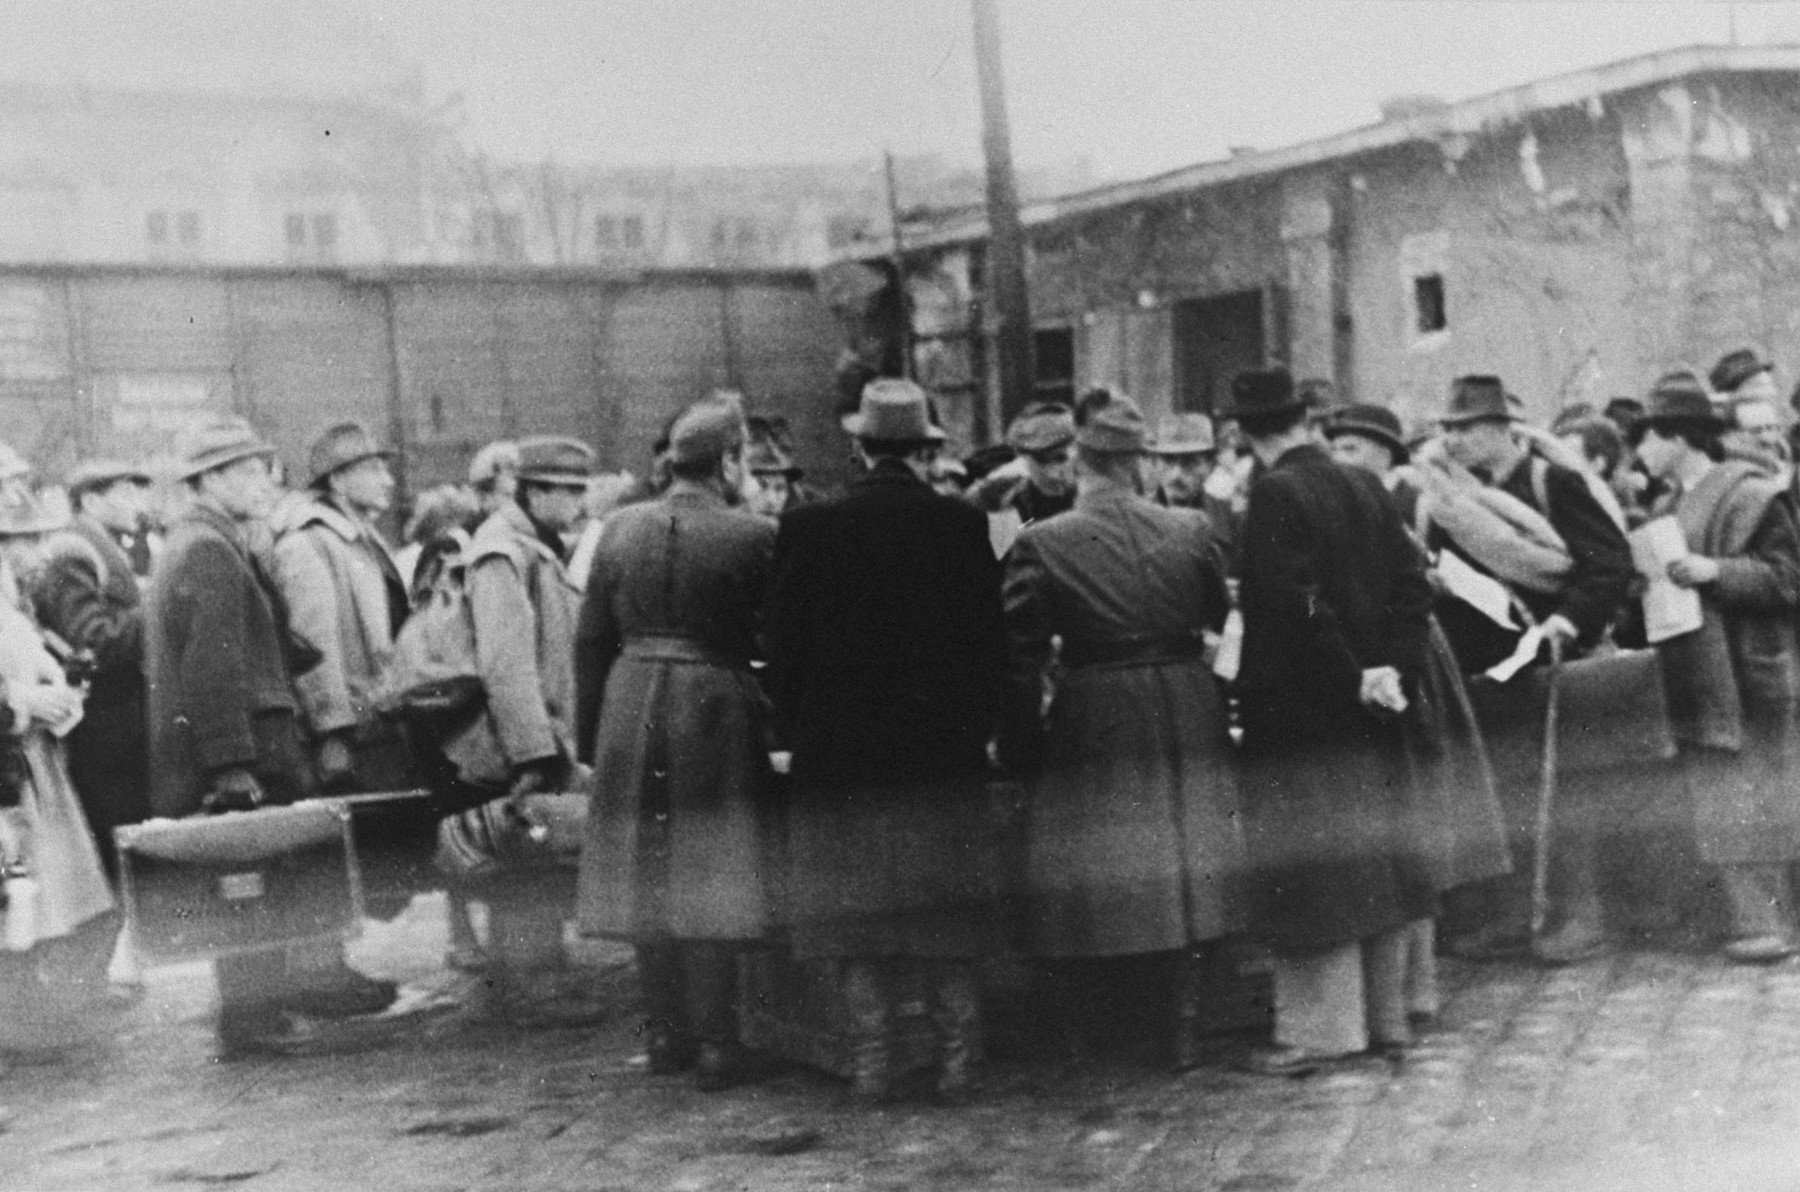 Raoul Wallenberg is present at the Jozsefvaros train station in Budapest where Jews who have been rounded-up for deportation, wait on the platform.

Wallenberg stands on the right with his hands clasped behing his back.  On one side of him is an officer of the Hungarian gendarmie named Lullay; on the other side is a Jew holding a Swedish Schutzpass [protective pass].